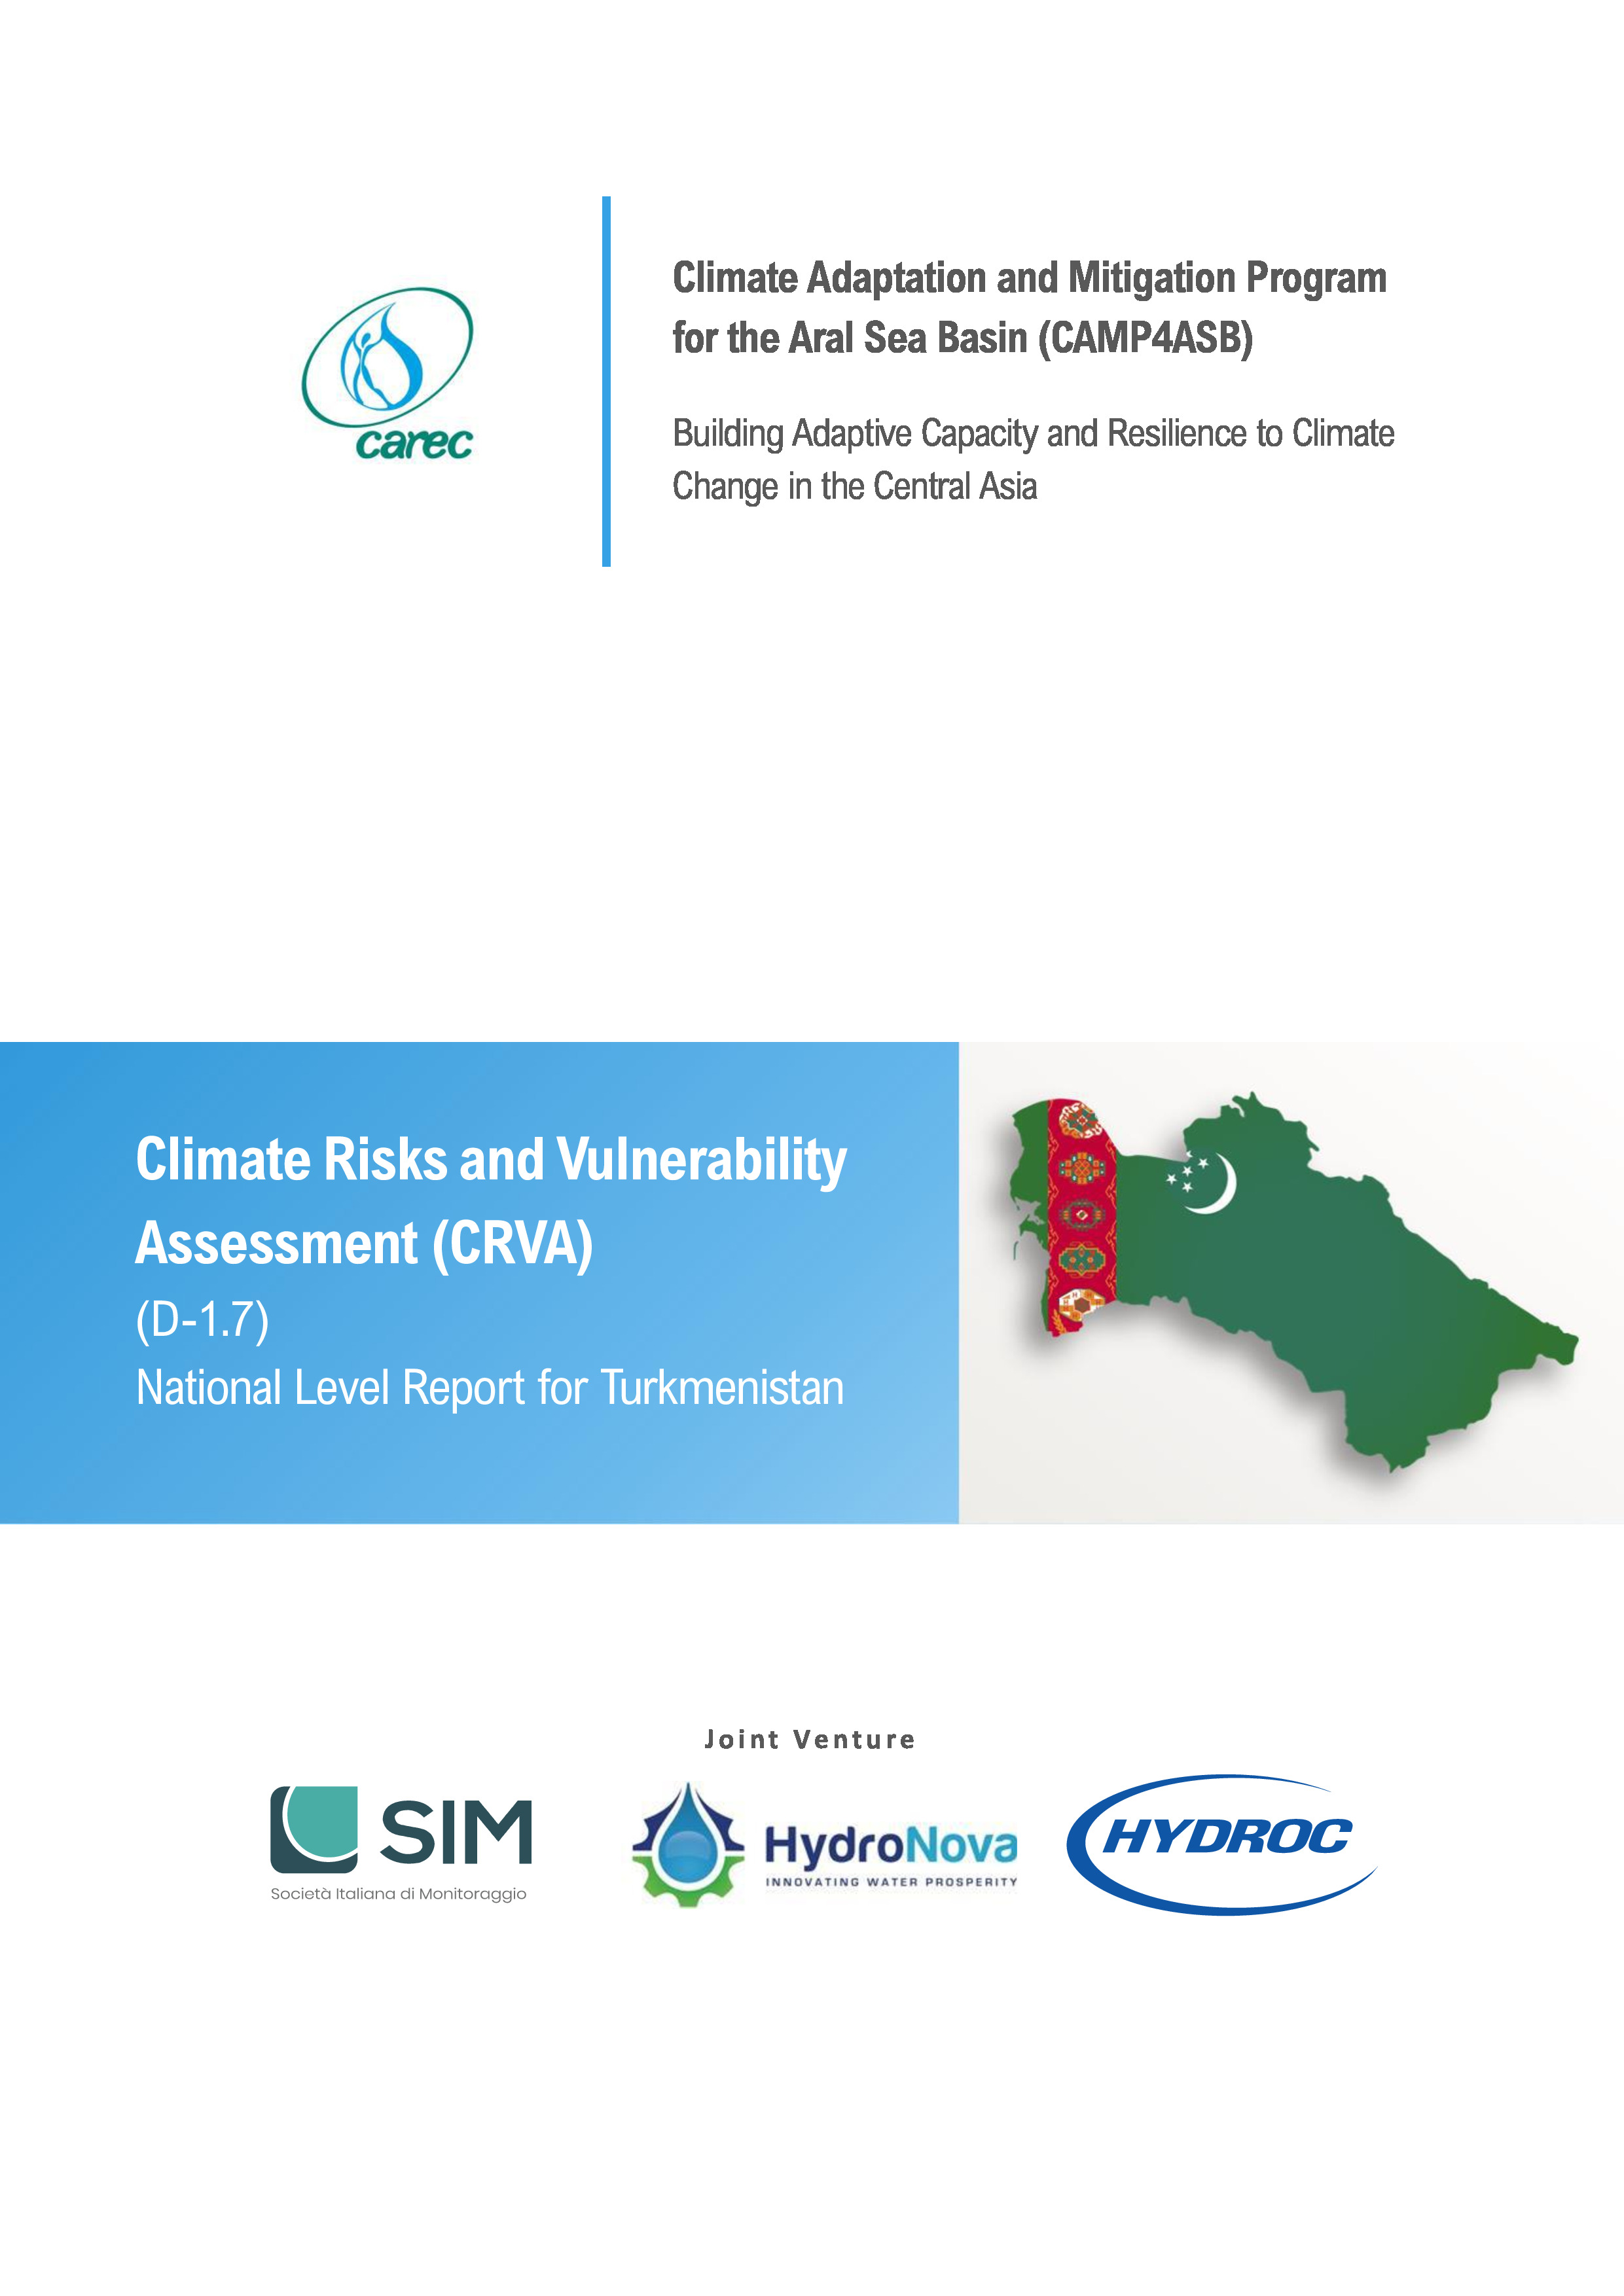 Climate Risks and Vulnerability Assessment (CRVA). National Level Report for Turkmenistan, 2021